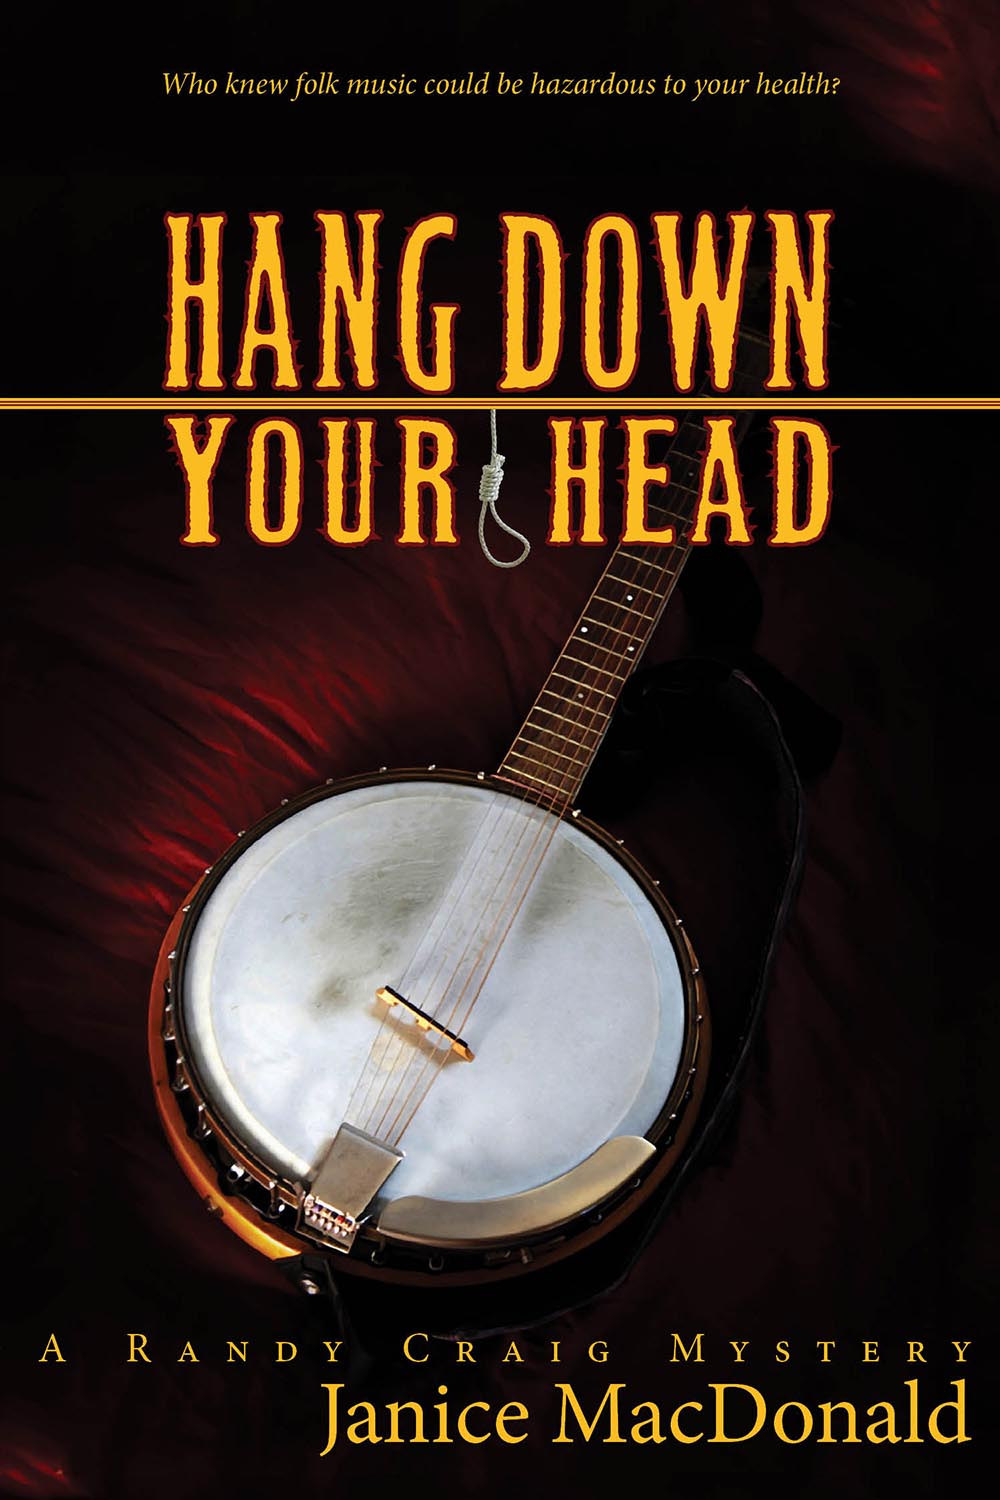 Hang Down Your Head